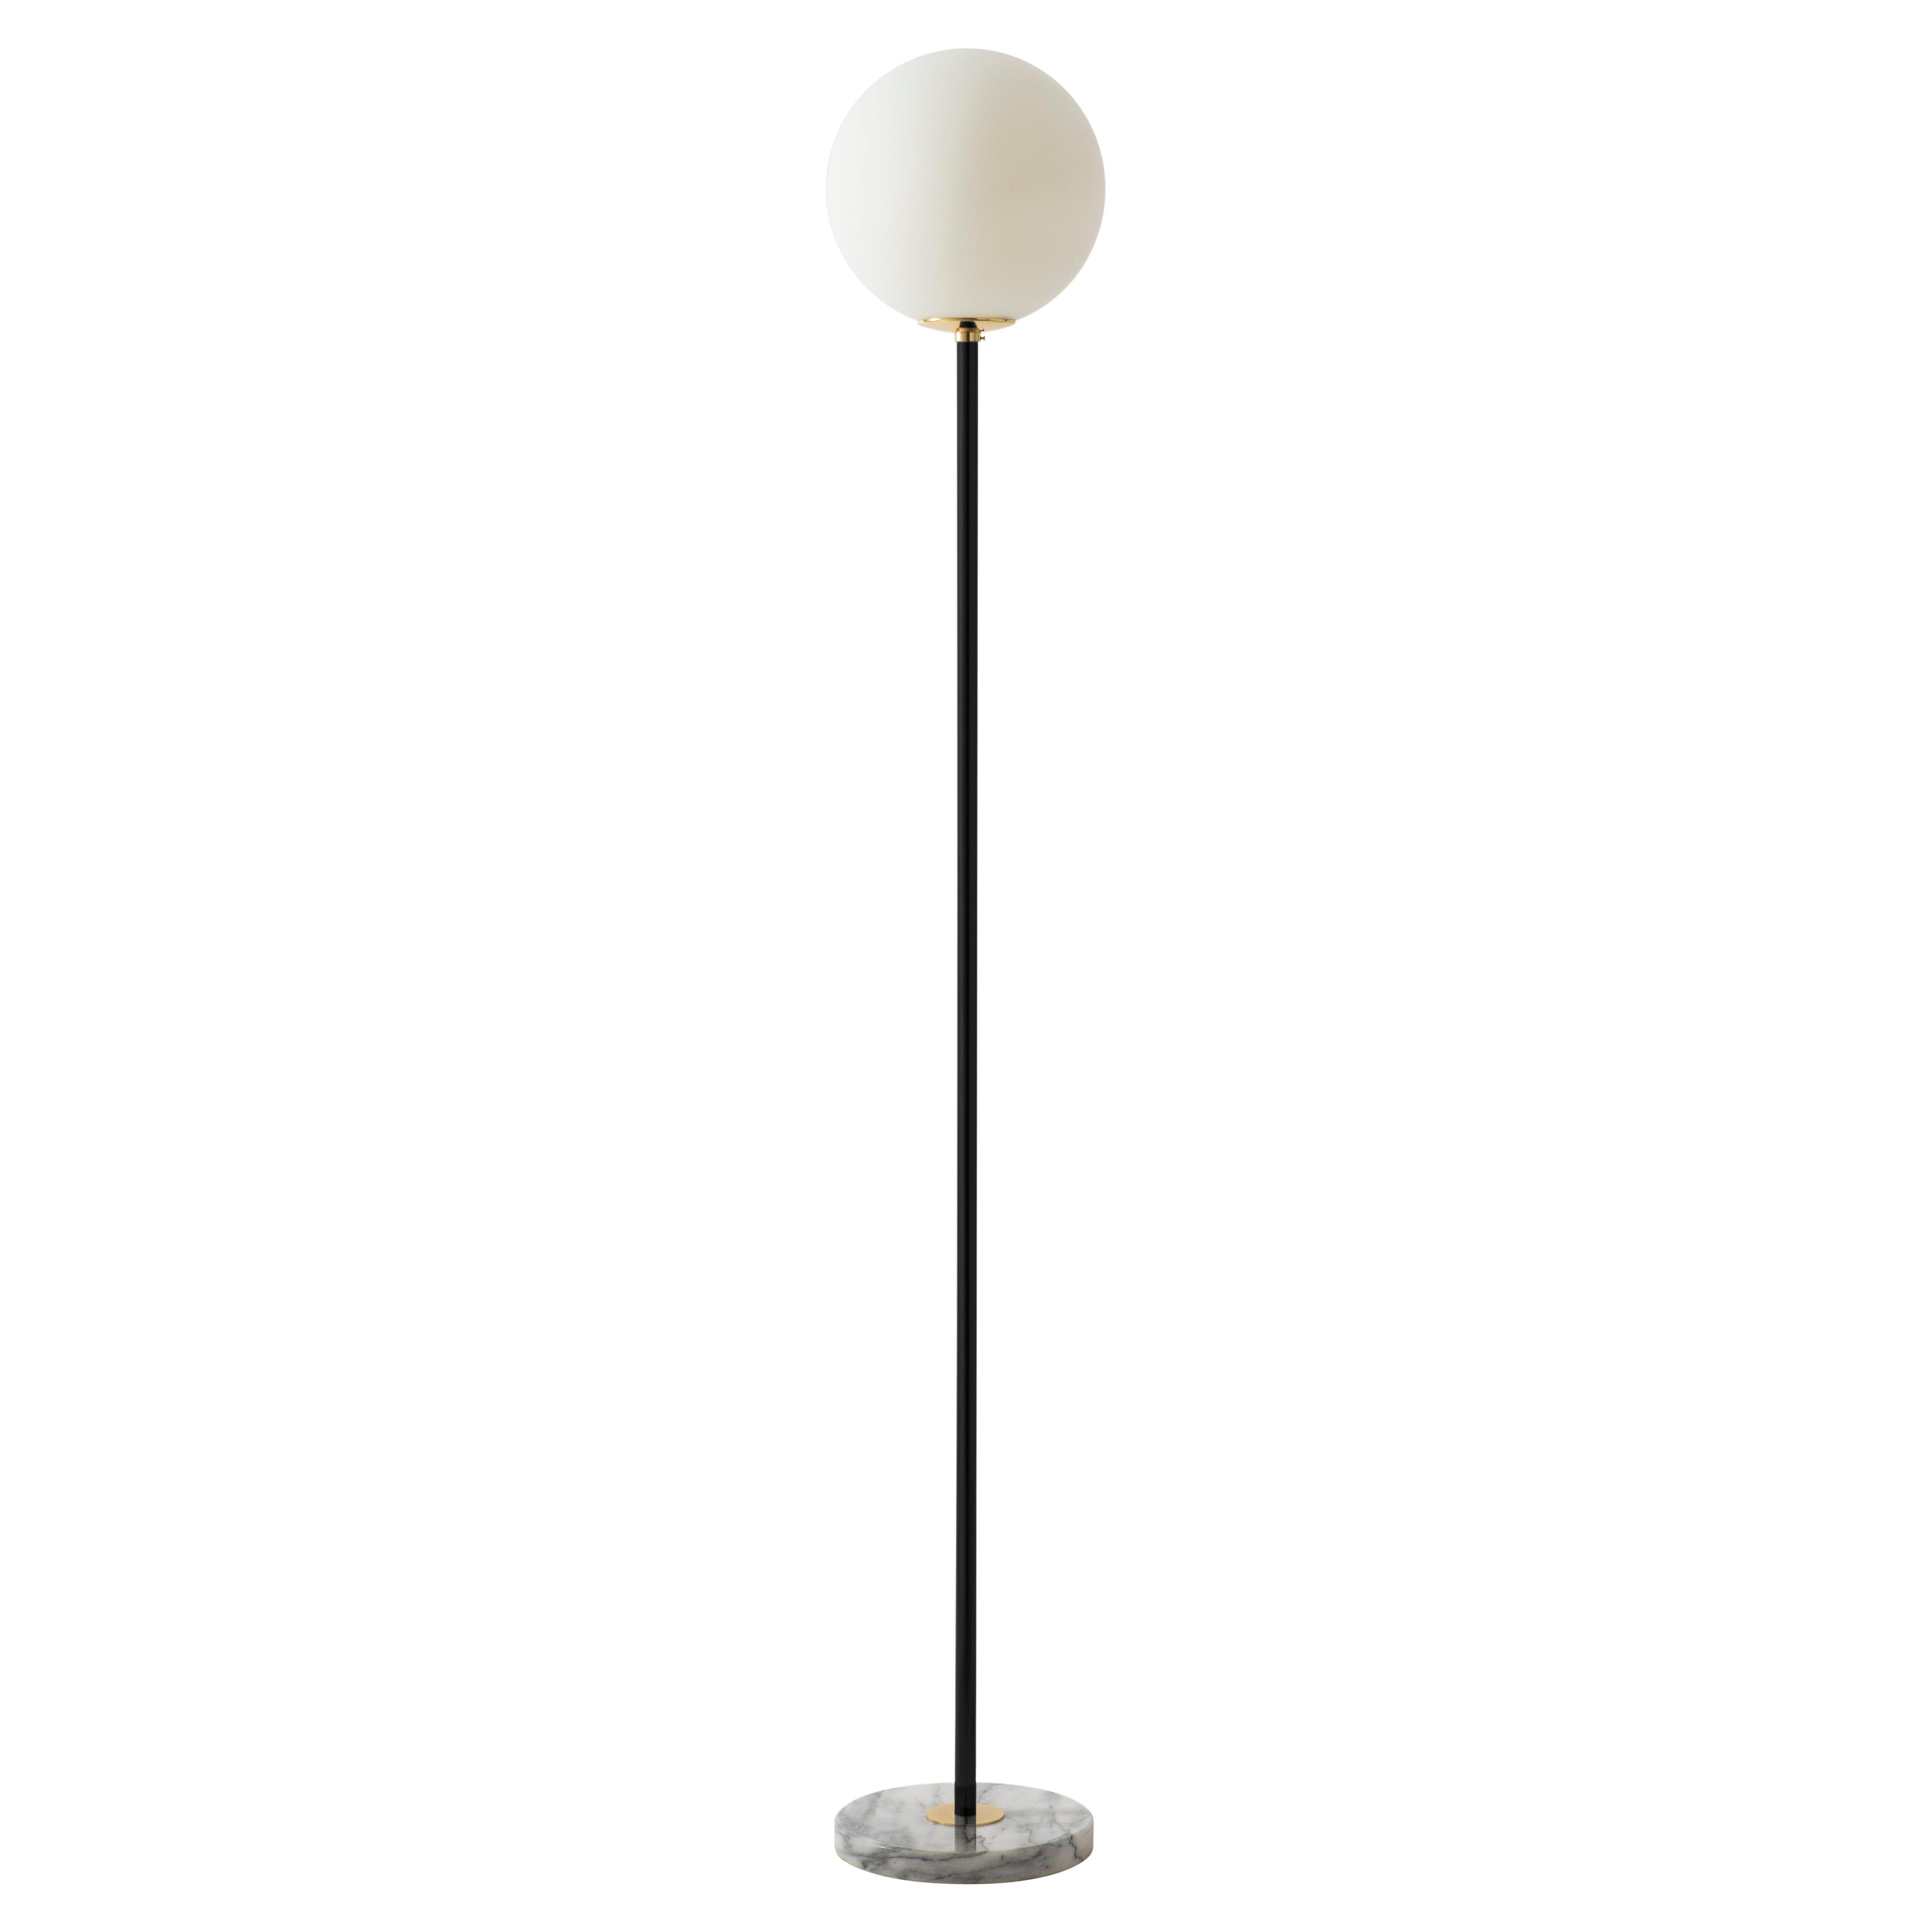 06 floor lamp 150 by Magic Circus Editions
Dimensions: D 25 x H 150 cm
Materials: Carrara marble base, smooth brass tube, glossy mouth blown glass
Dimmable version available.


Rethinking, reimagining, redesigning familiar objects that we look